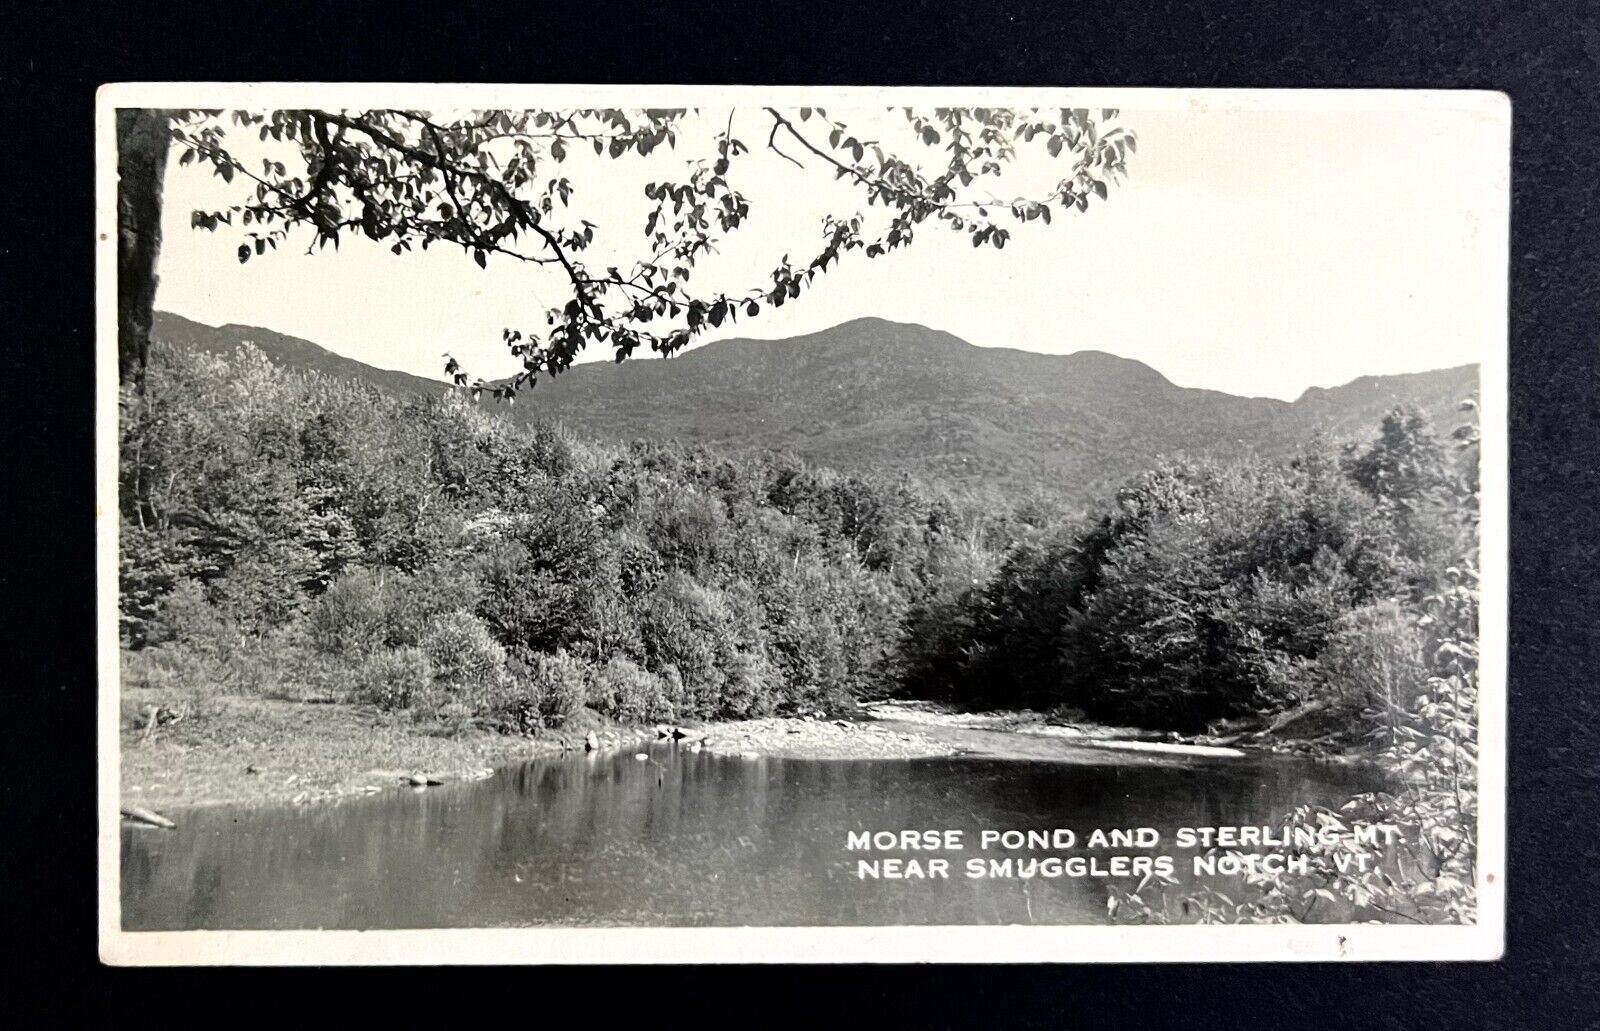 1920s Morse Pond Sterling Mountain Smugglers Notch Vermont Vintage RPPC Postcard